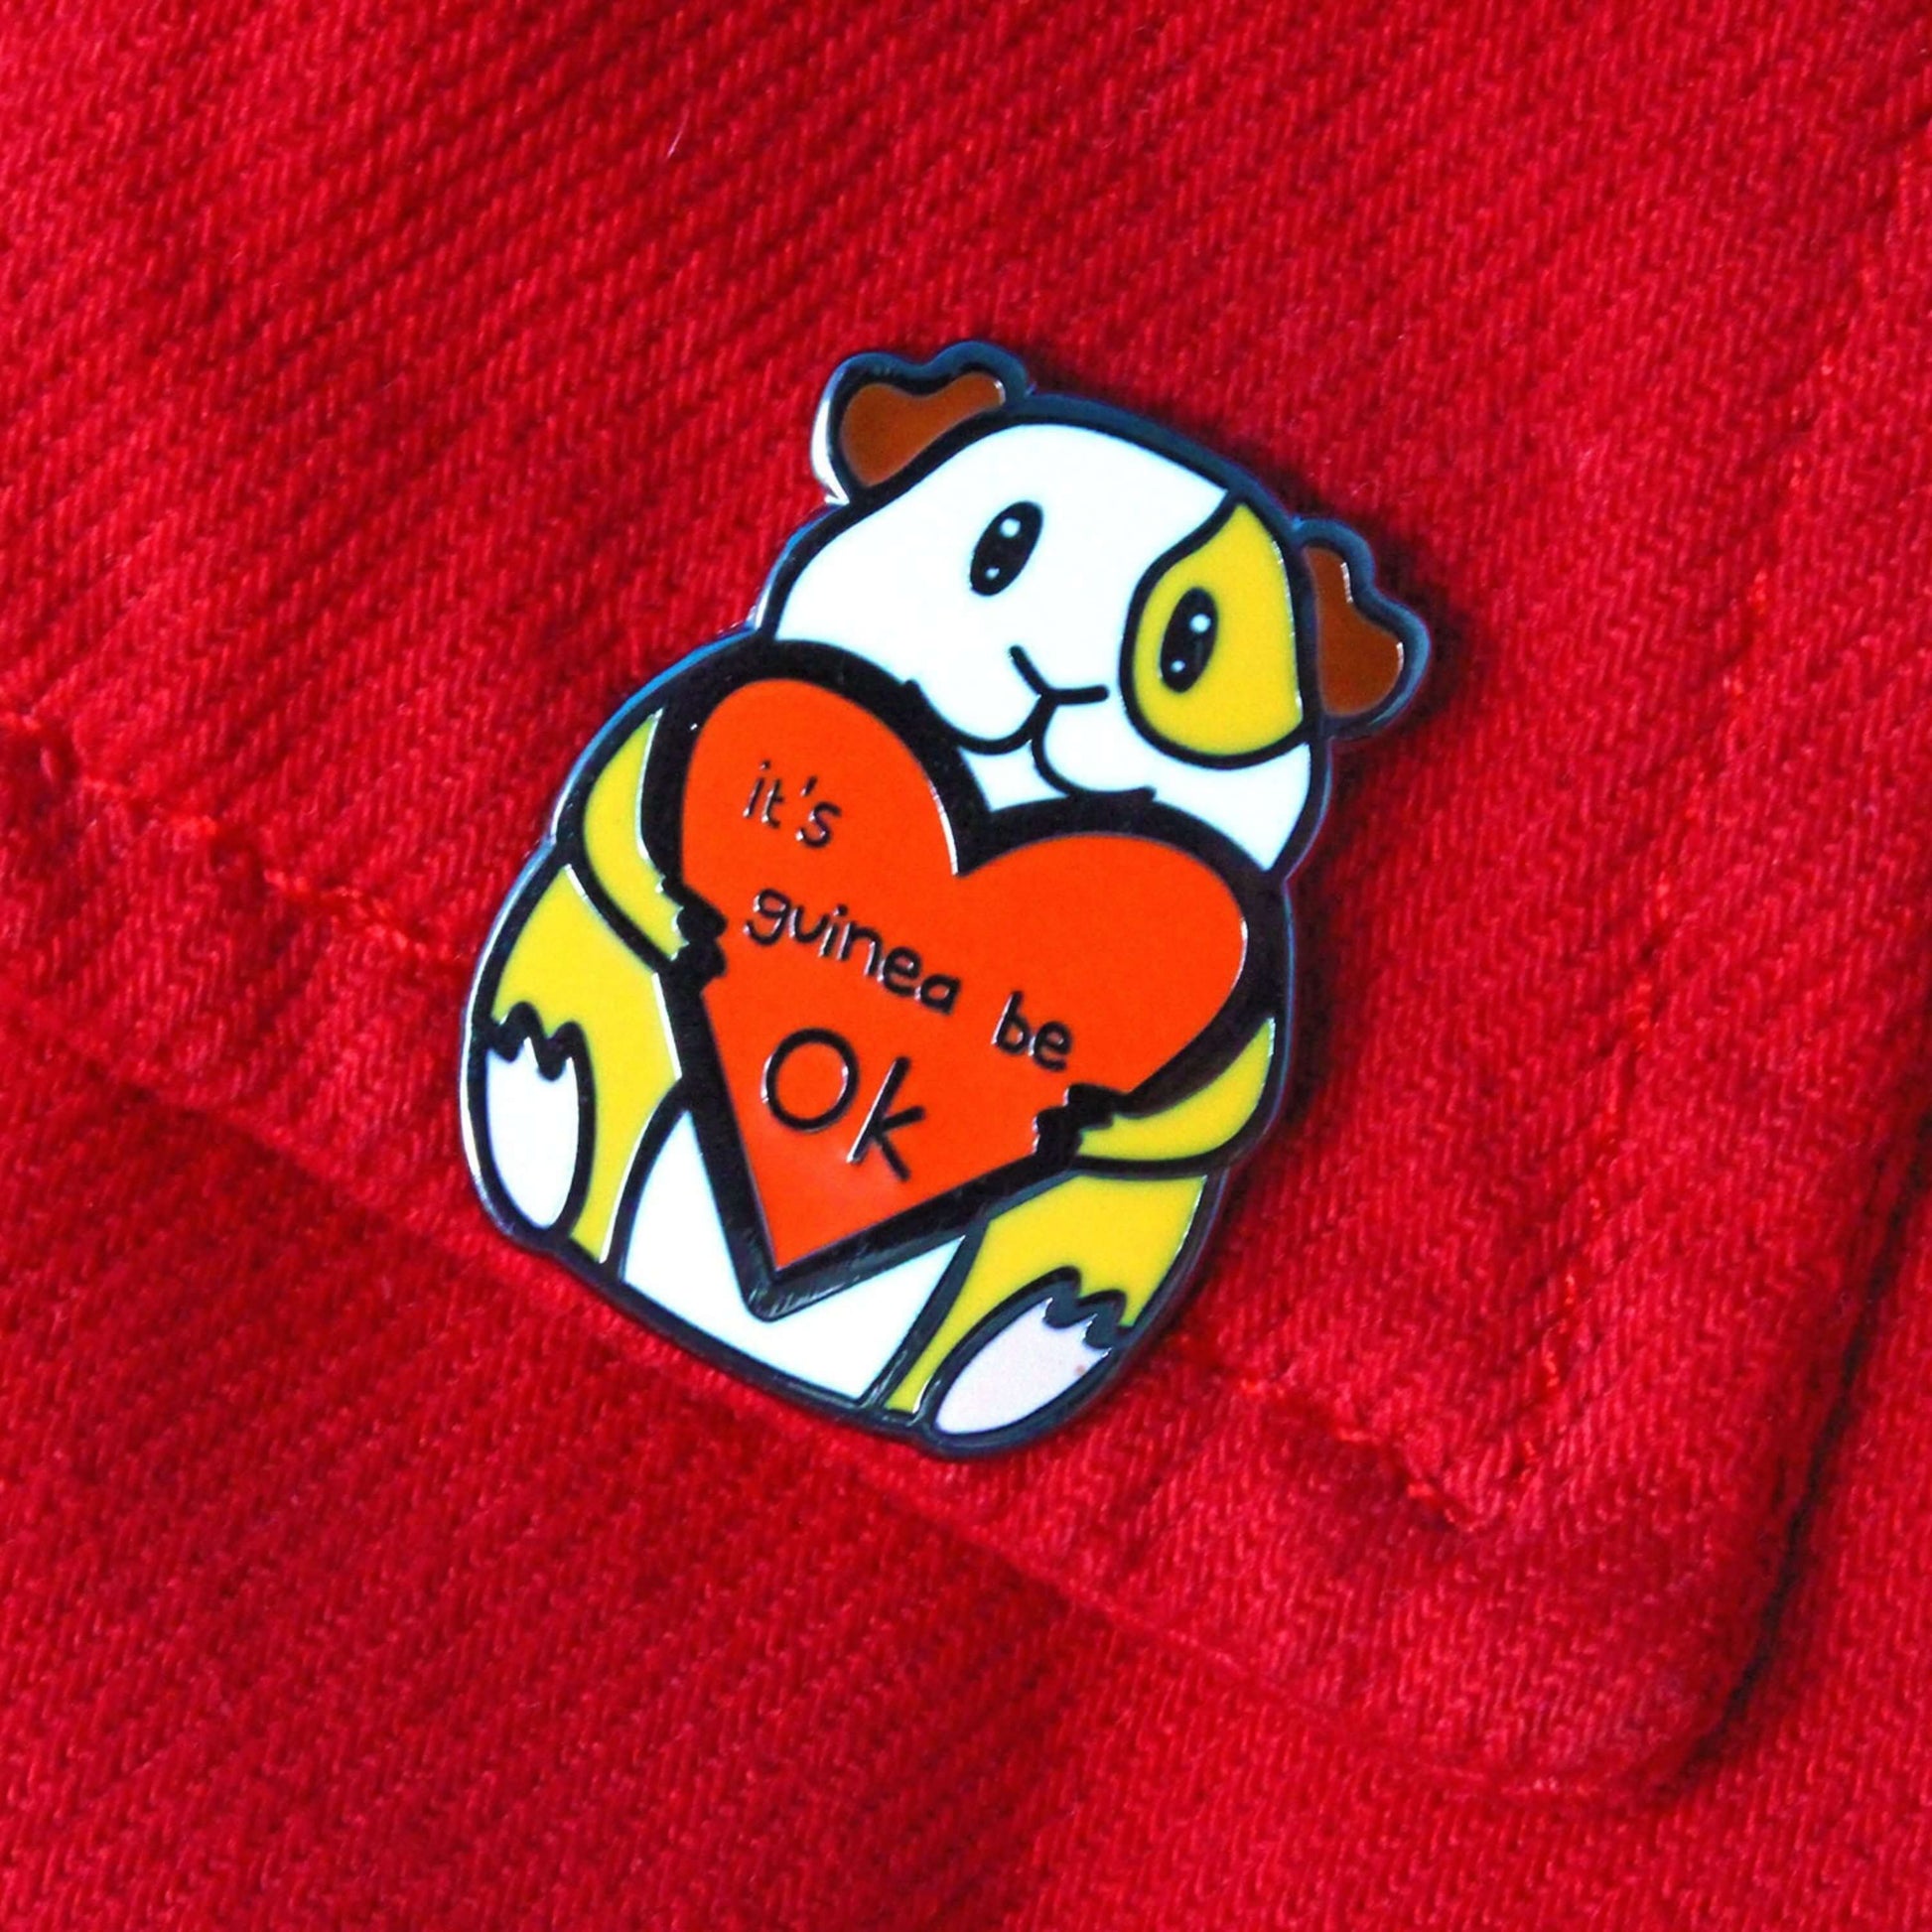 Guinea Pig Mental Health Enamel Pin pinned onto a red jacket. The enamel pin is of a smiling guinea pig holding a big red heart with the text it's guinea be ok inside. The enamel pin is deigned to raise awareness for mental health.